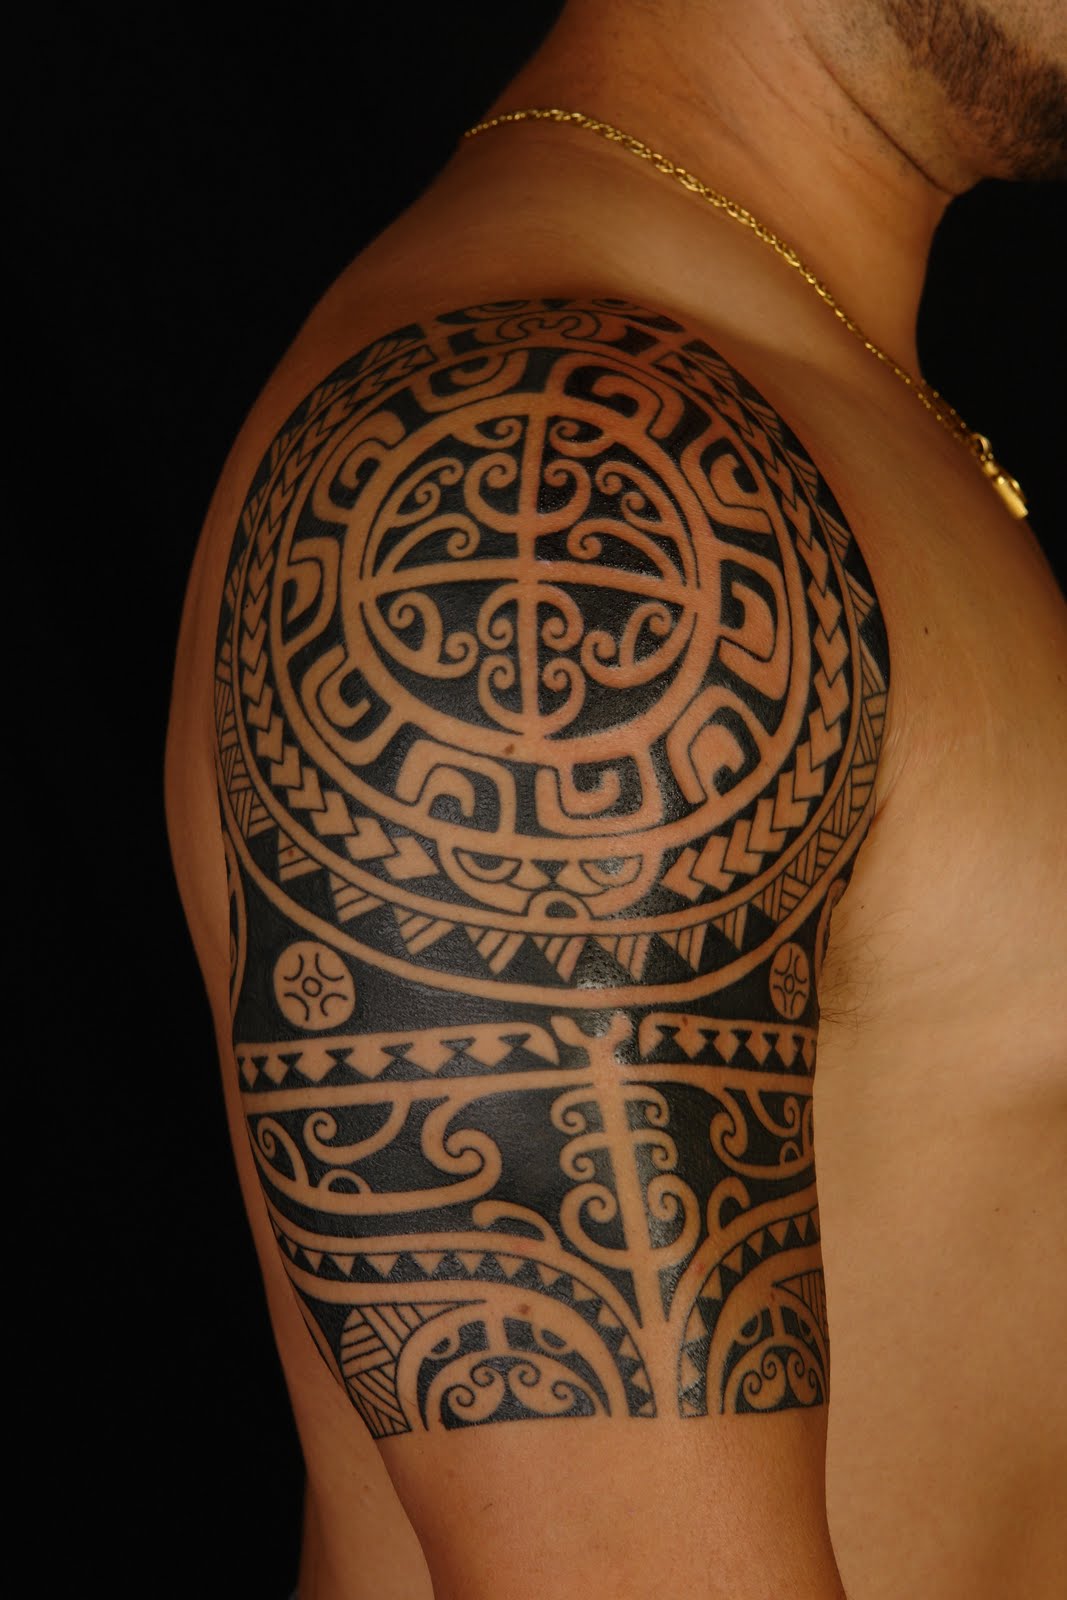 This tribal tattoo is a large